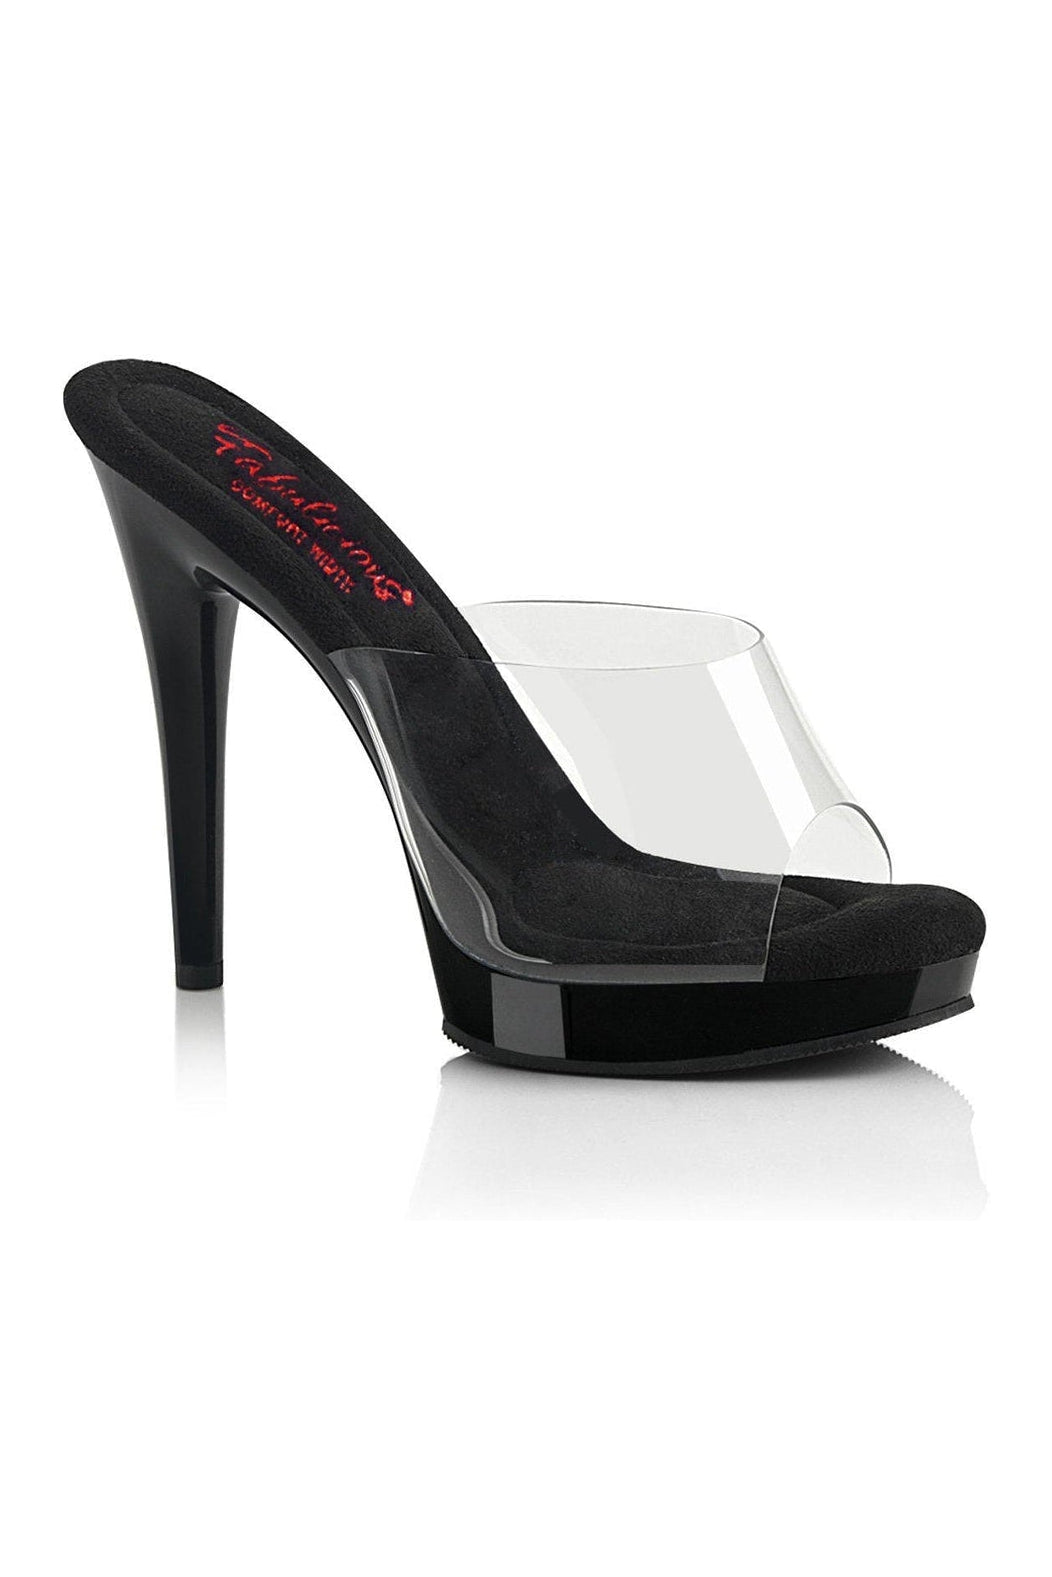 GLORY-501 Slide | Clear Vinyl-Slides-Fabulicious-Clear-7-Vinyl-SEXYSHOES.COM